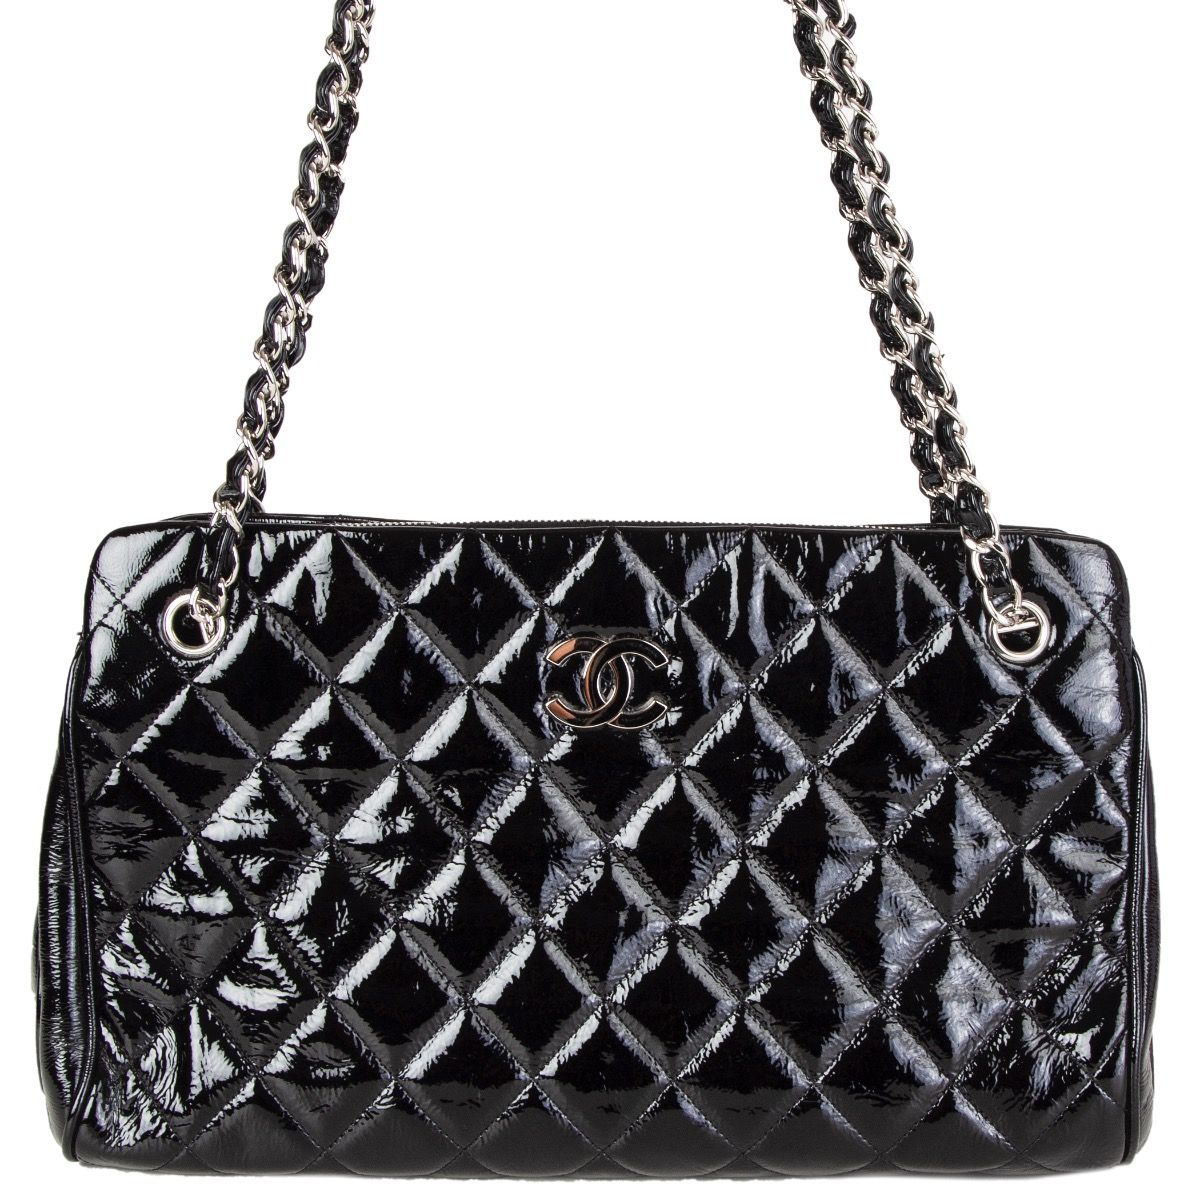 Chanel Quilted Patent Leather Bag